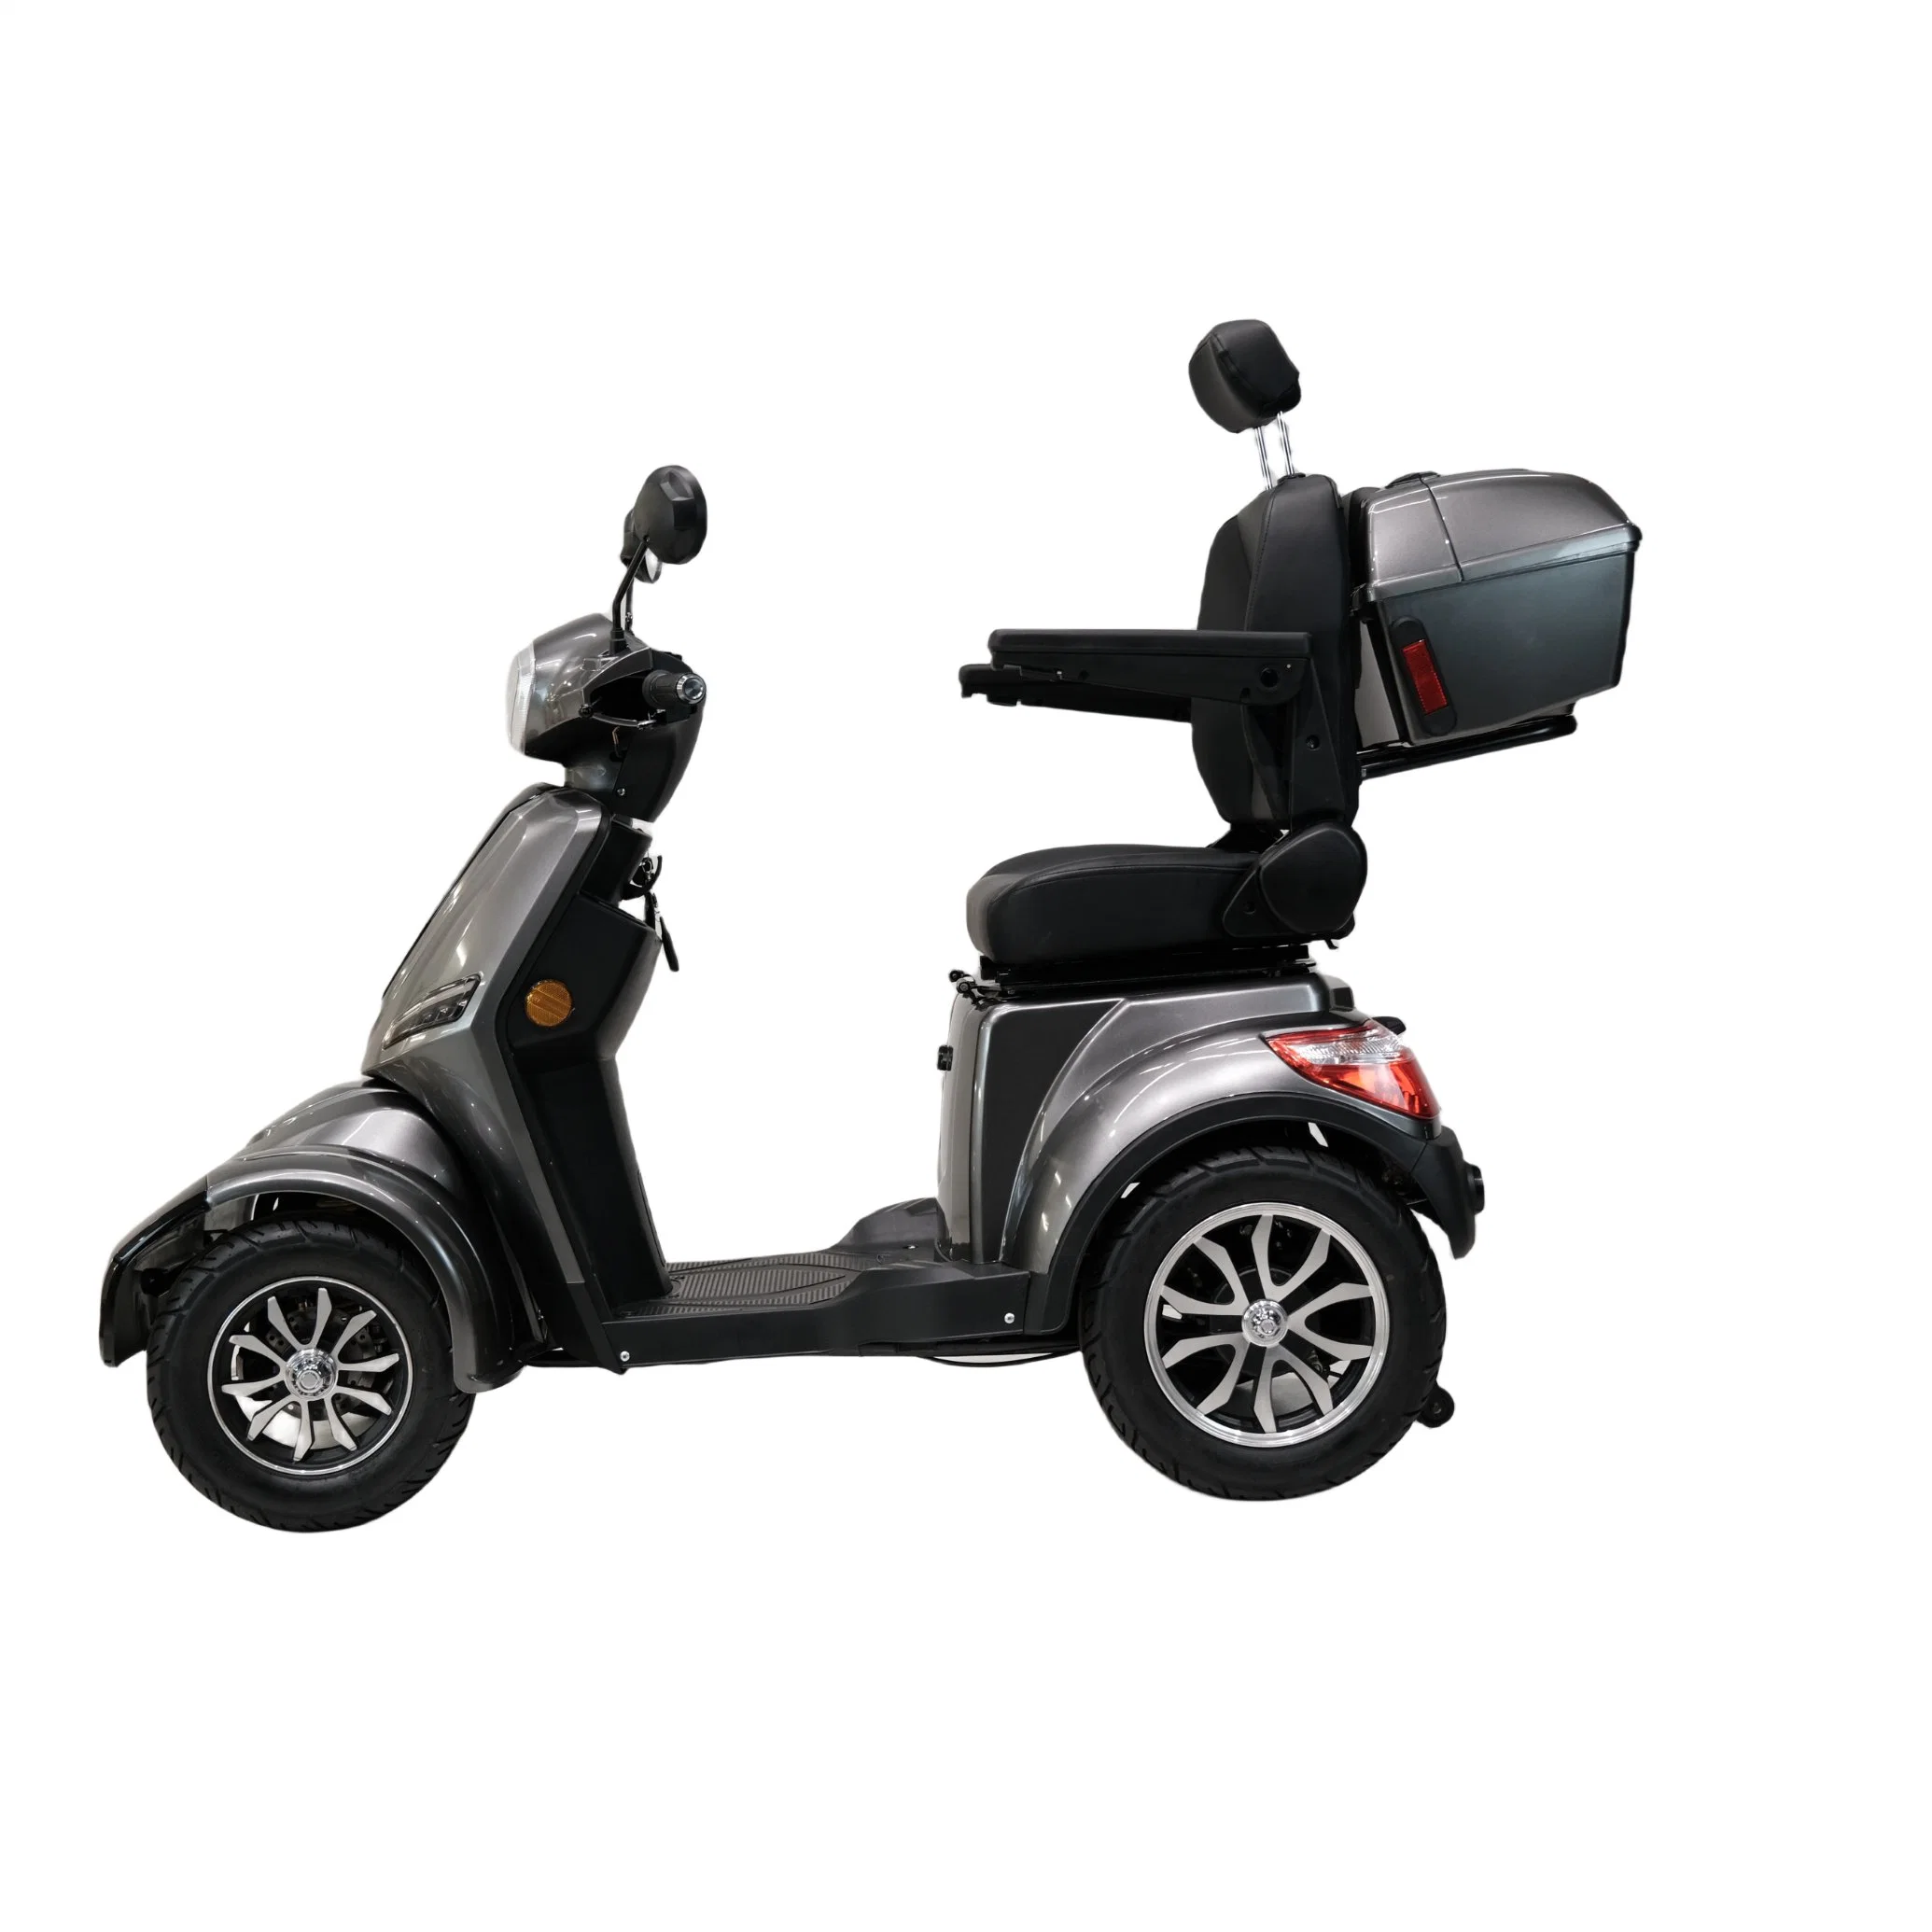 Hot Selling 4 Wheel City Mobility Vehicle with Best Price Portable Mobility Electric Scooter Disability Convenient to Elder